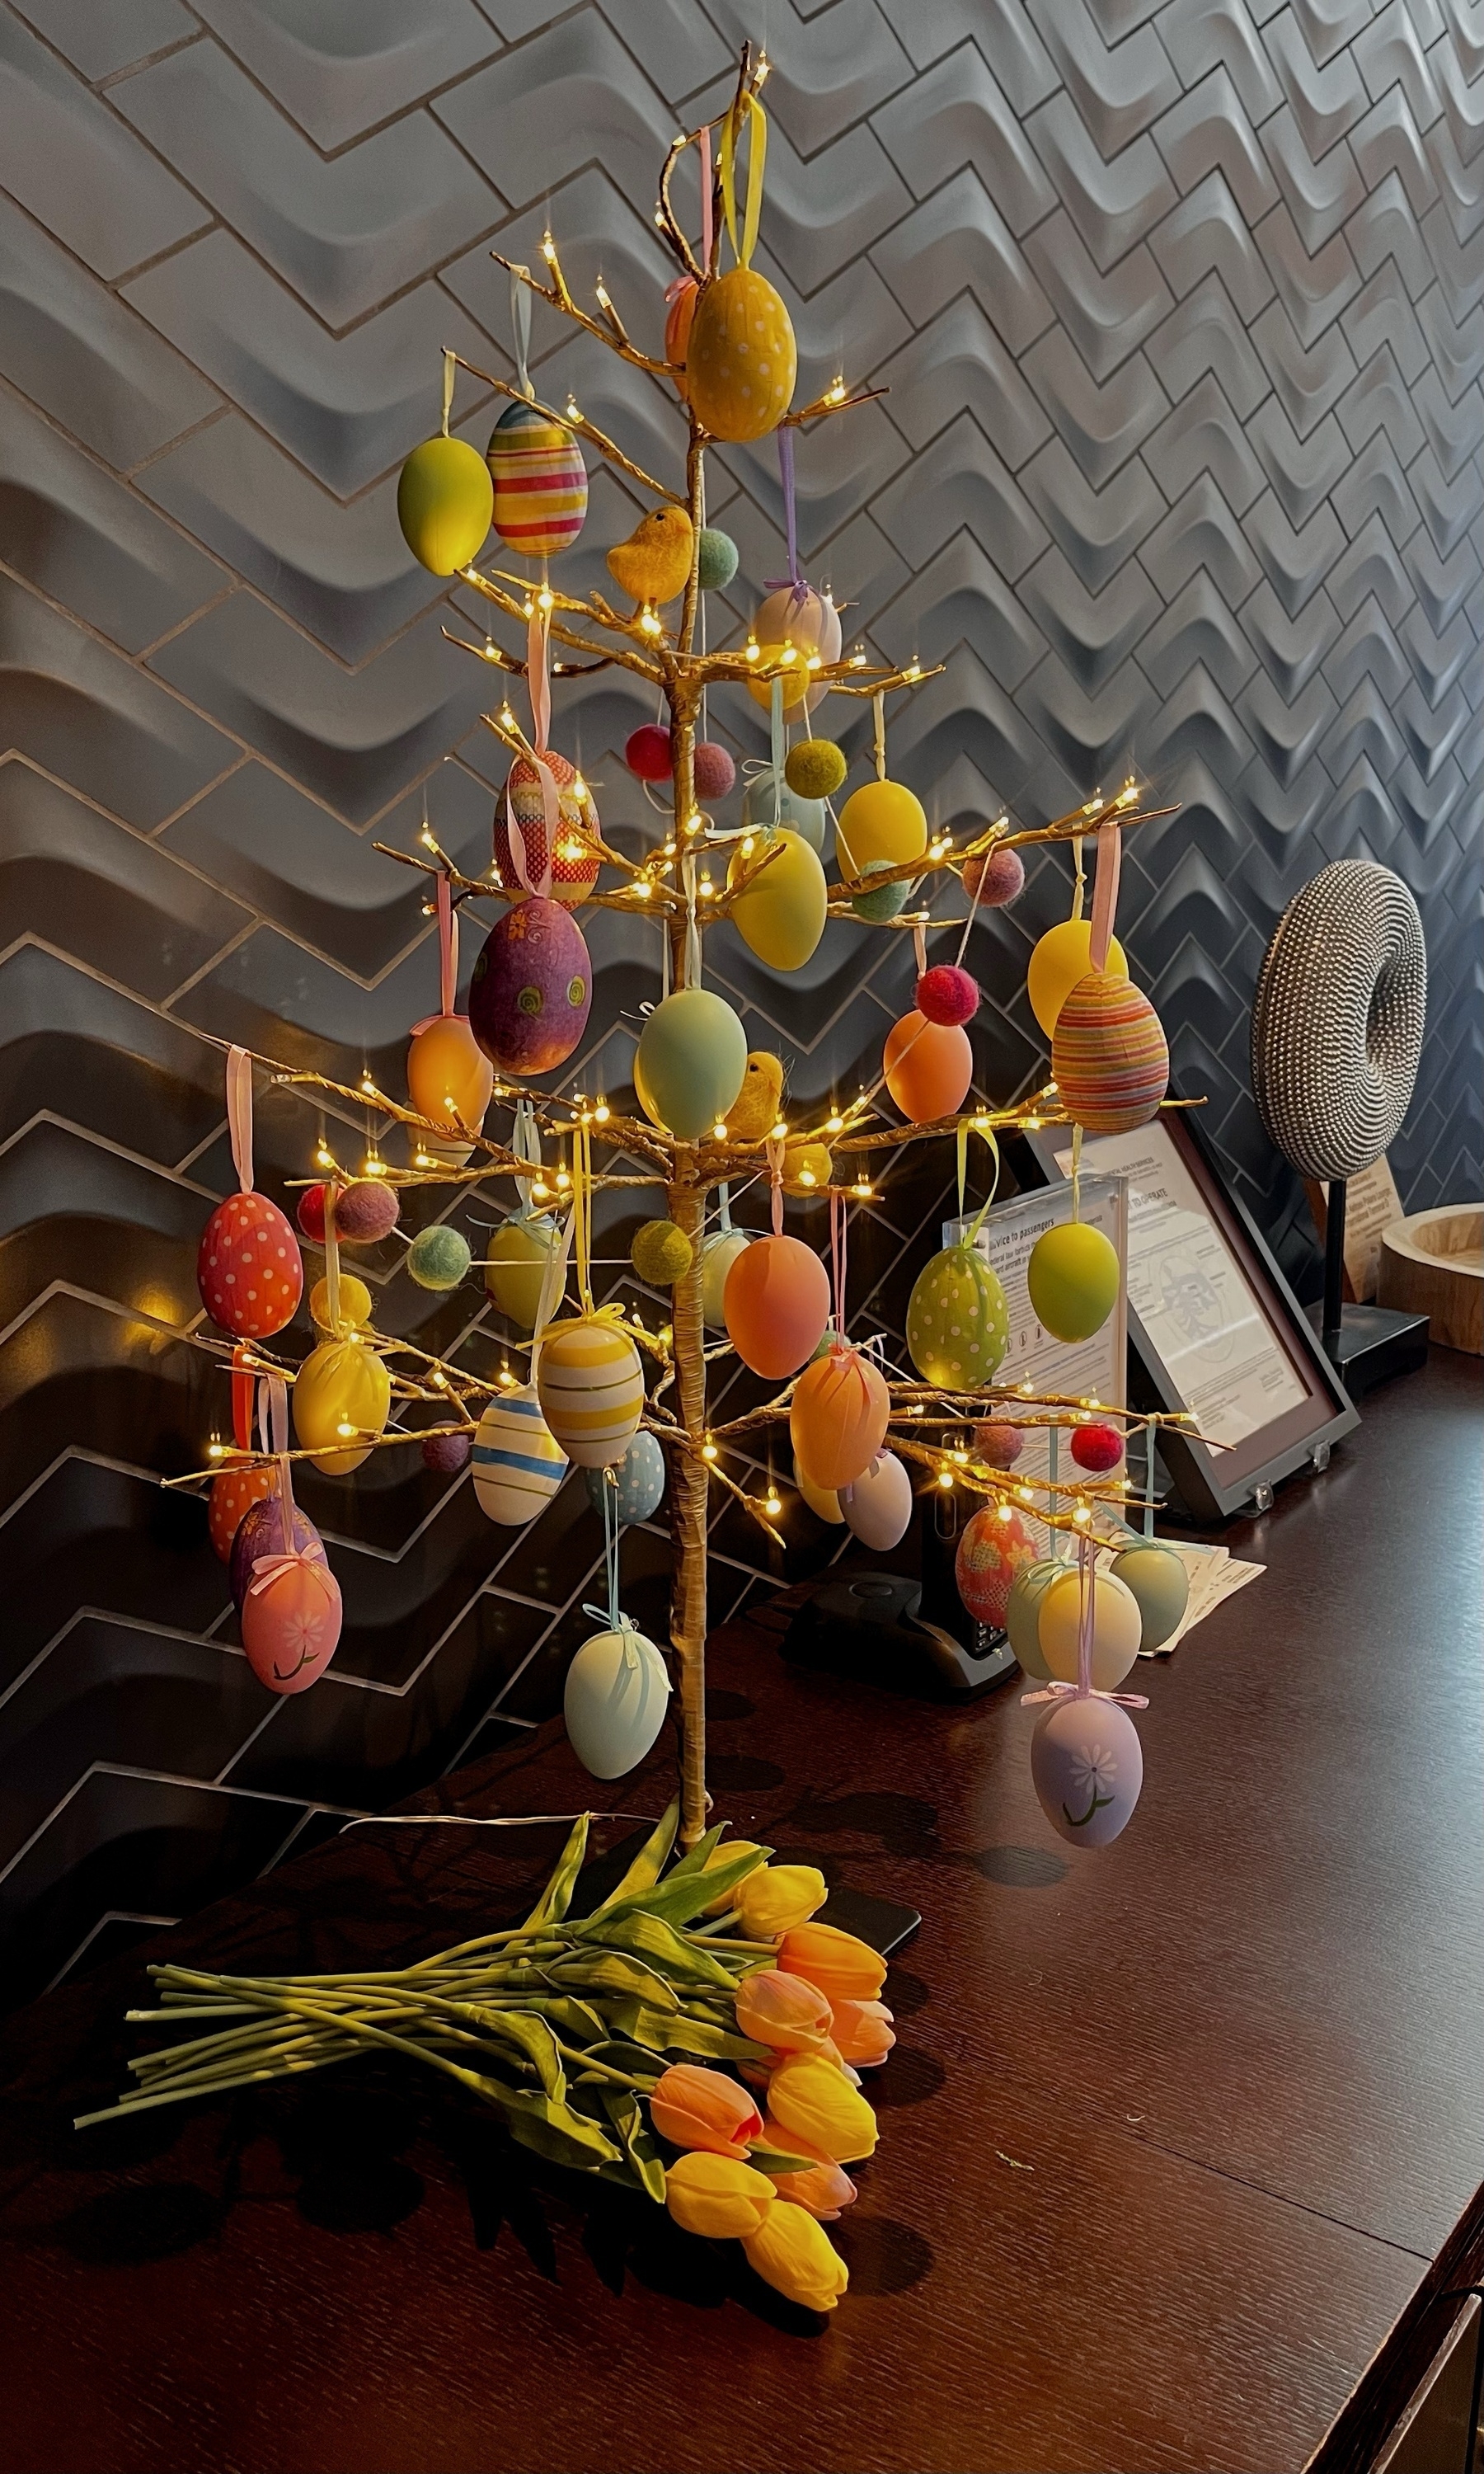 A small decorative tree decorated with small Easter eggs and fairy lights. Some peach colored tulips lie at its base